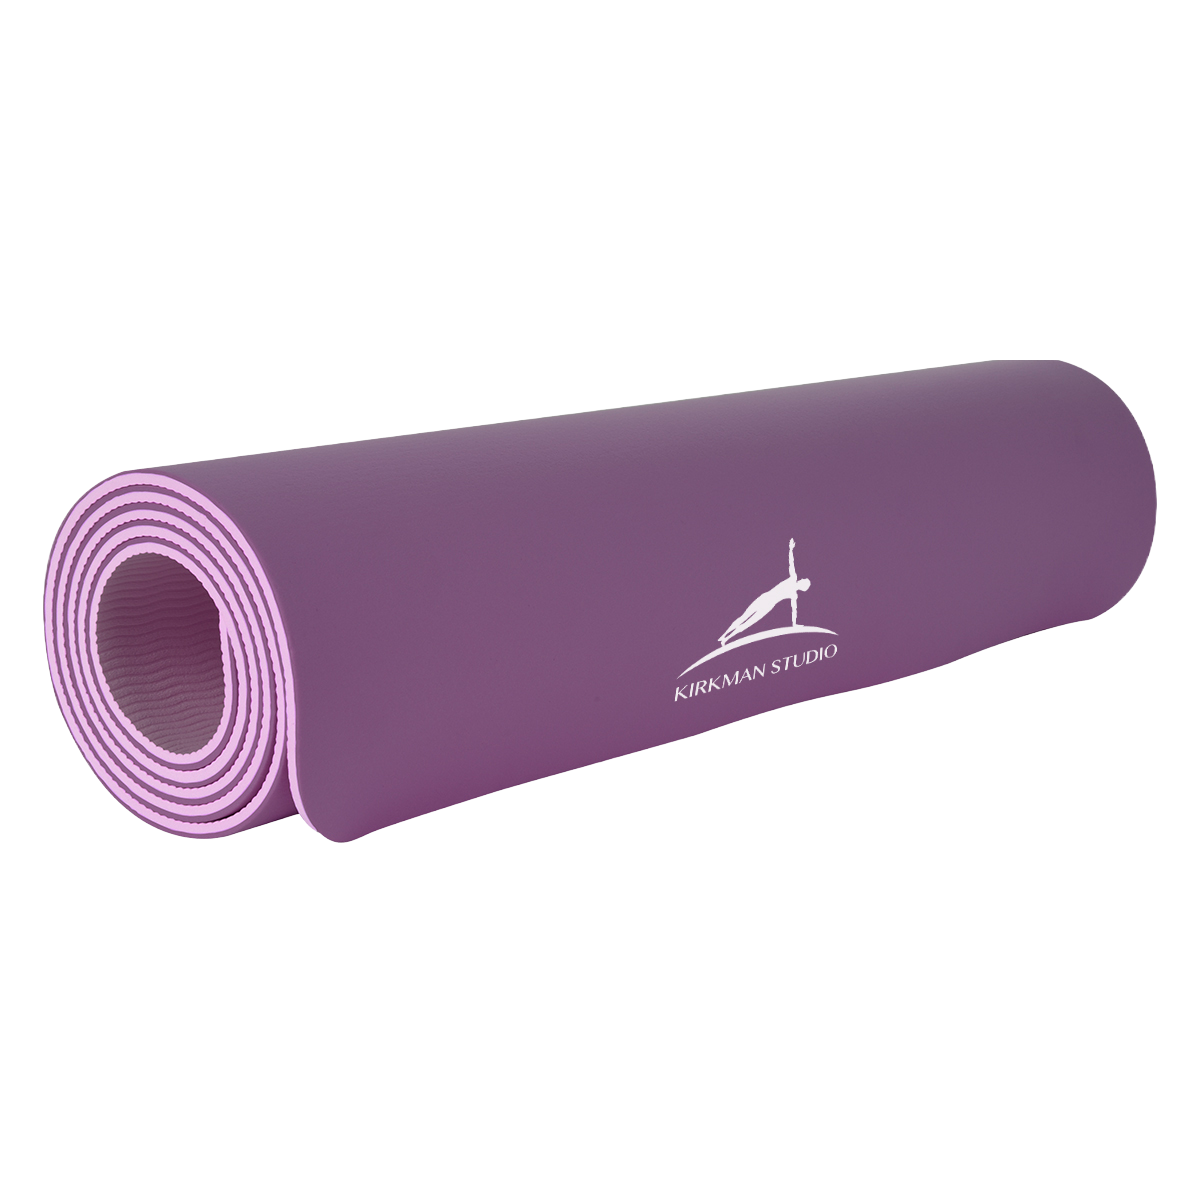 Two-Tone Double Layer Yoga Mat